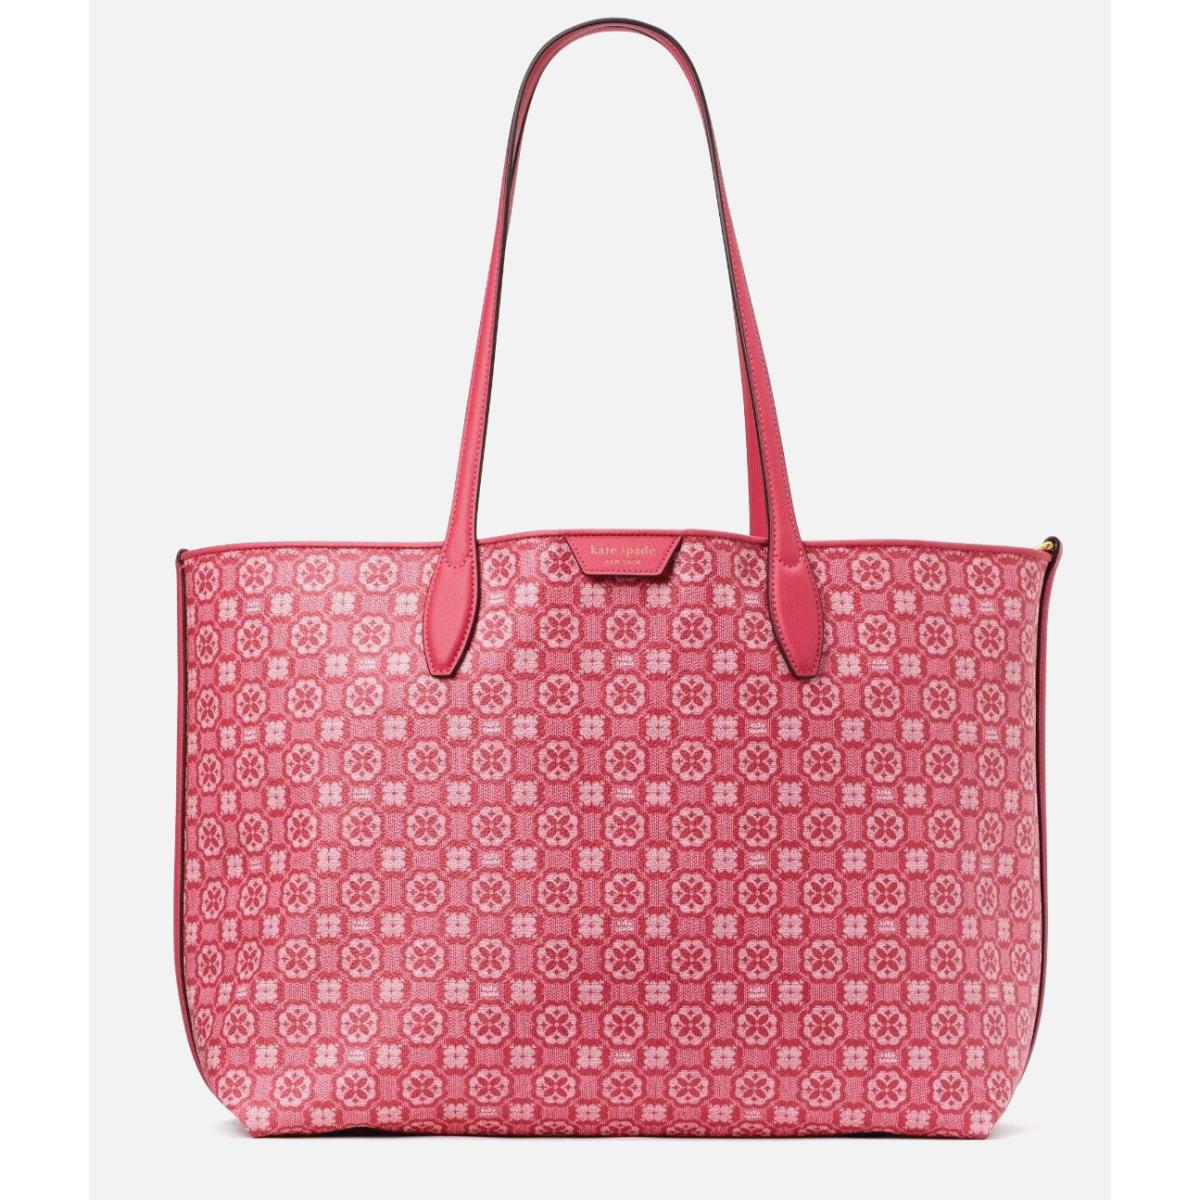 New Kate Spade Flower Monogram Coated Canvas Tote Raspberry Multi with Dust Bag